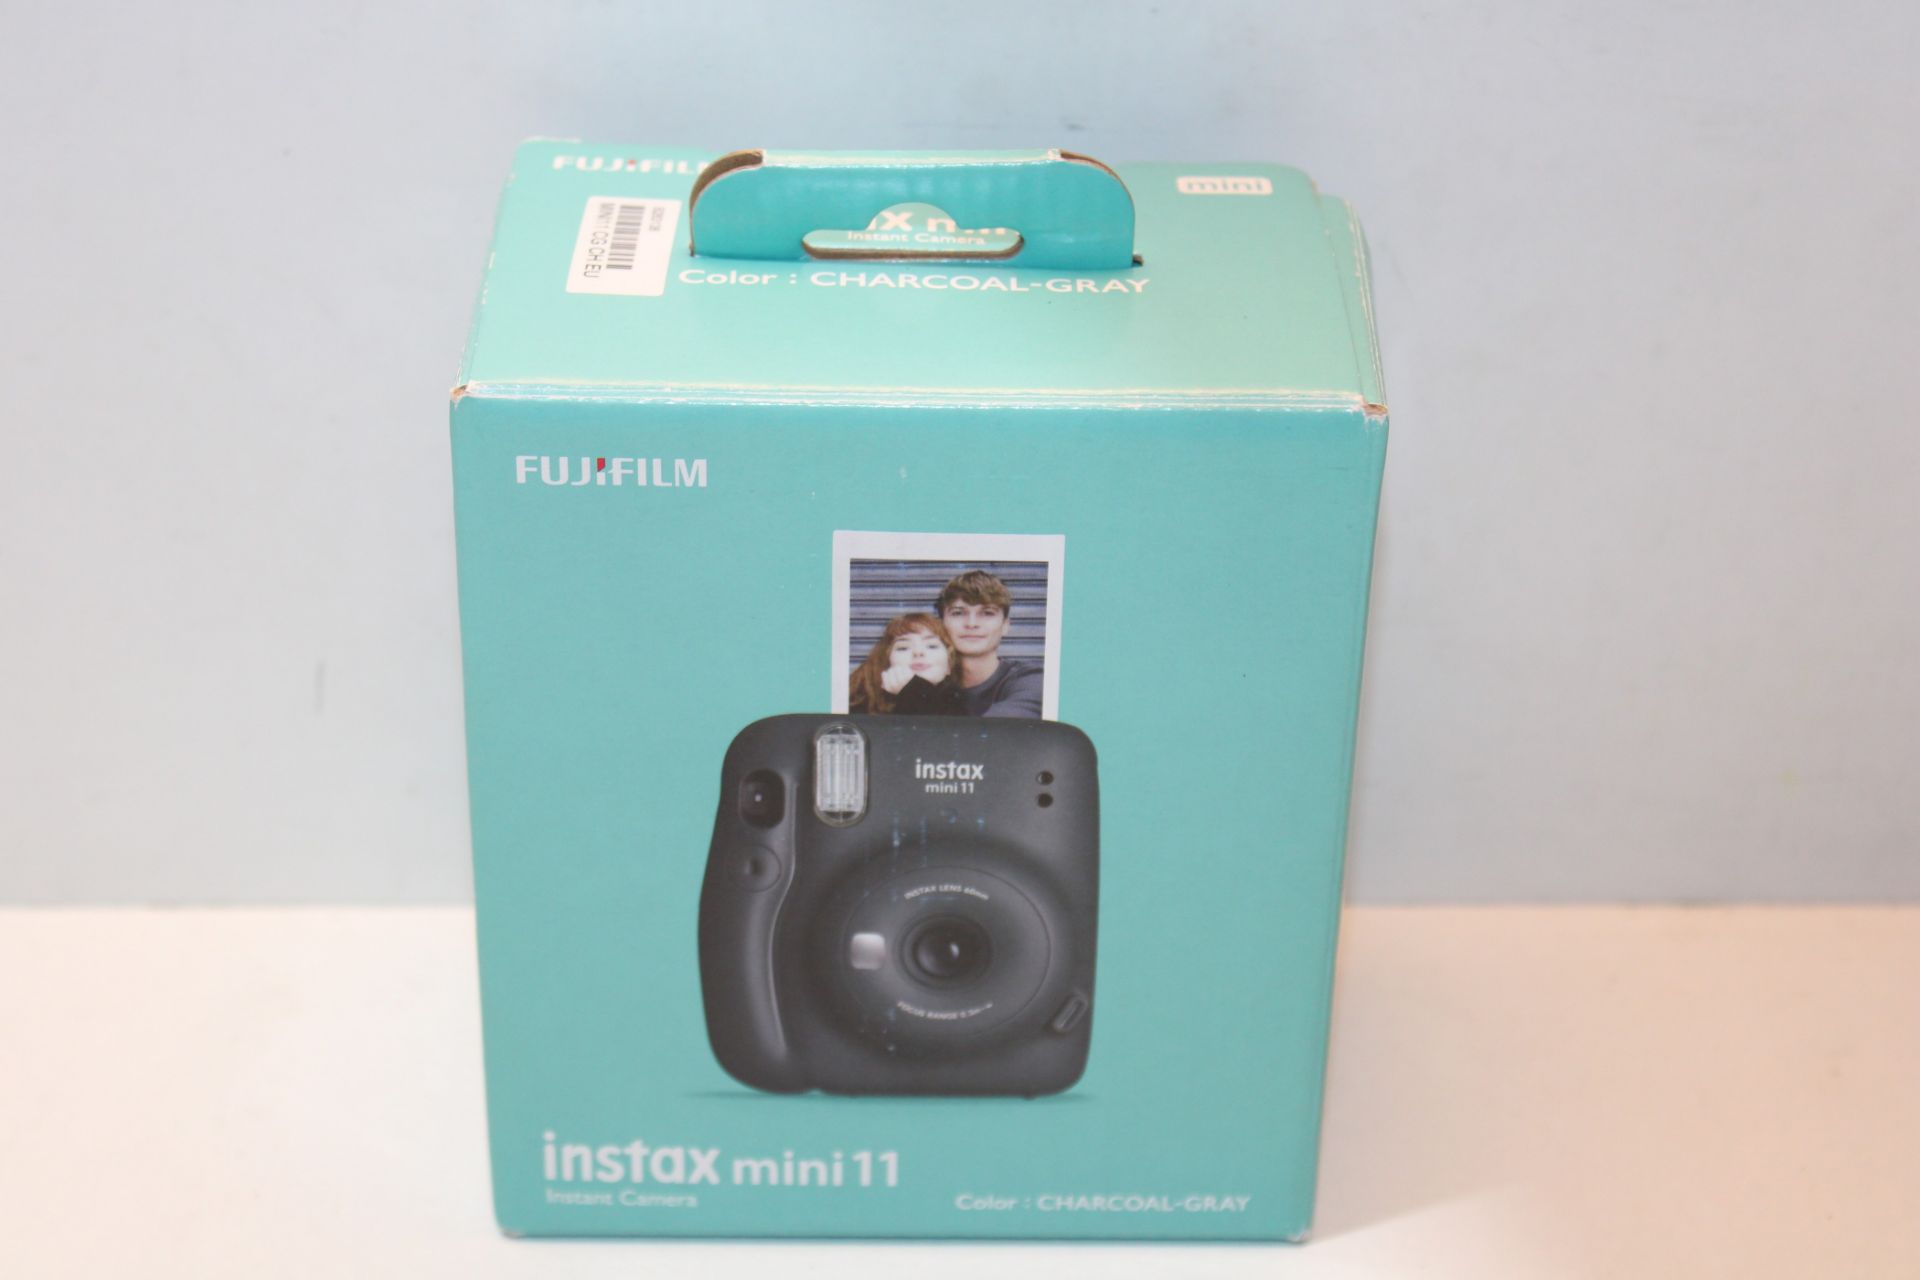 instax 16654970 mini 11 Camera, Charcoal Gray £68.99Condition ReportAppraisal Available on